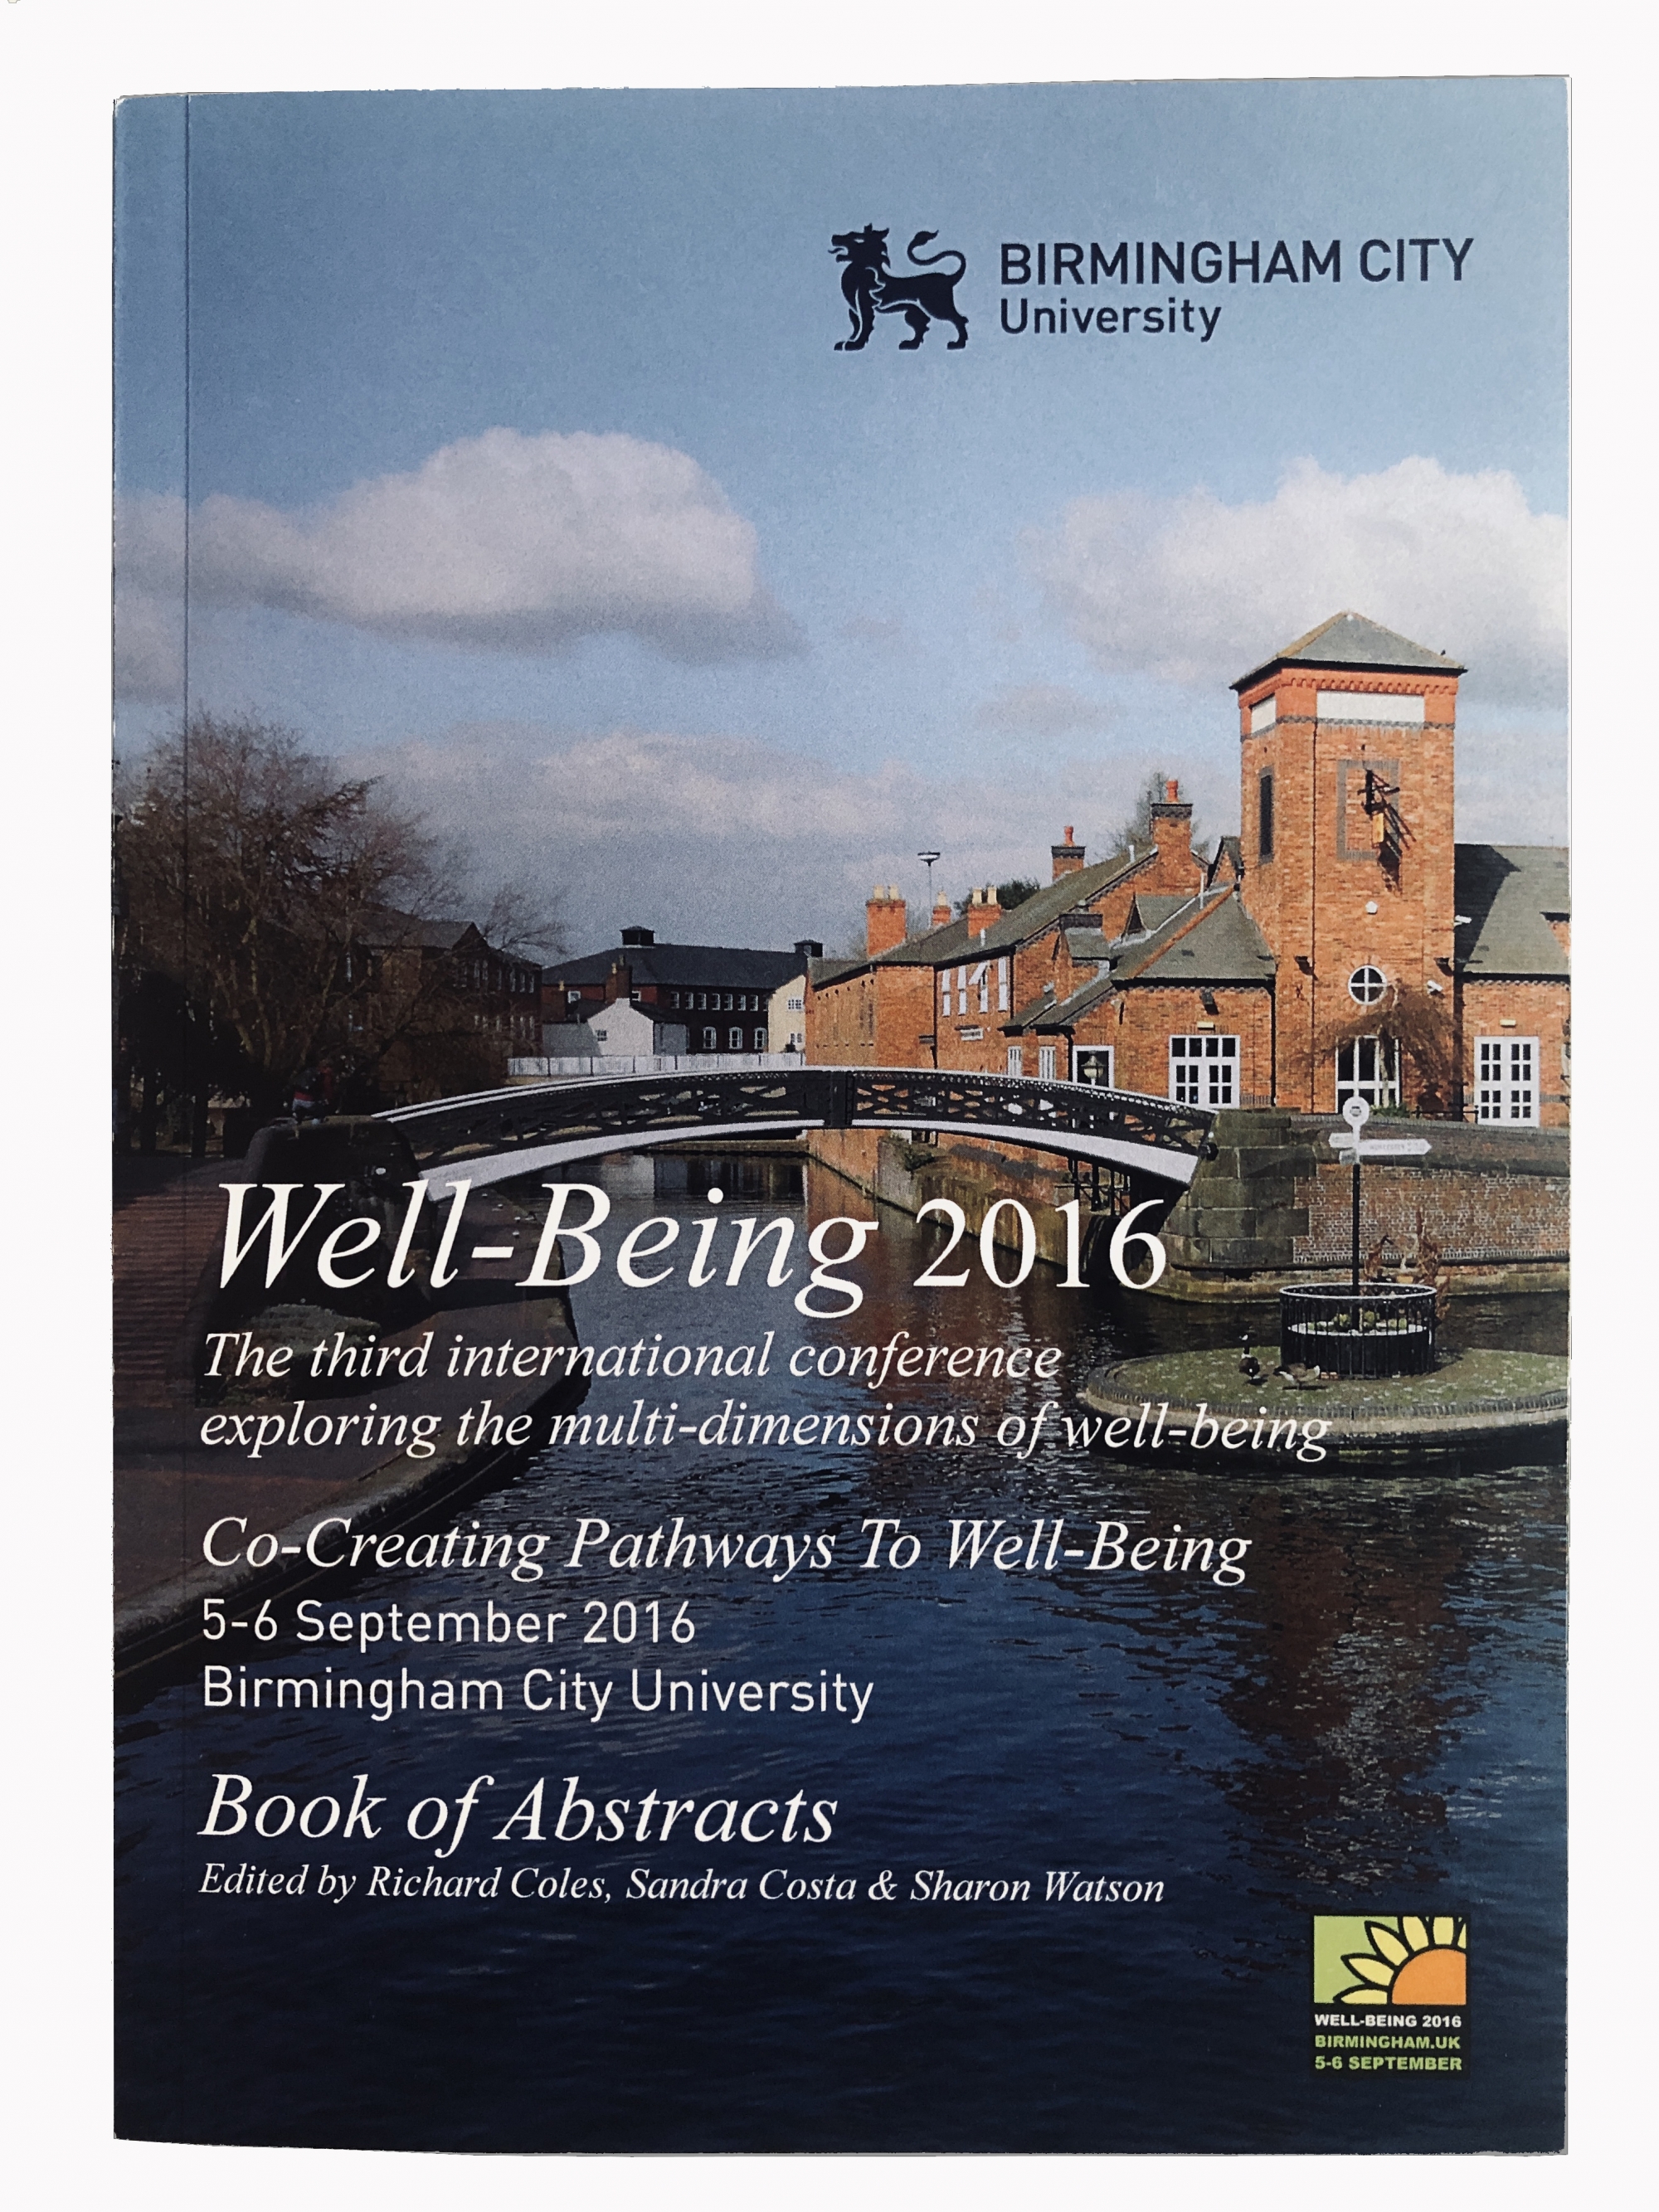 Conference publication including abstract by Esther Johnson